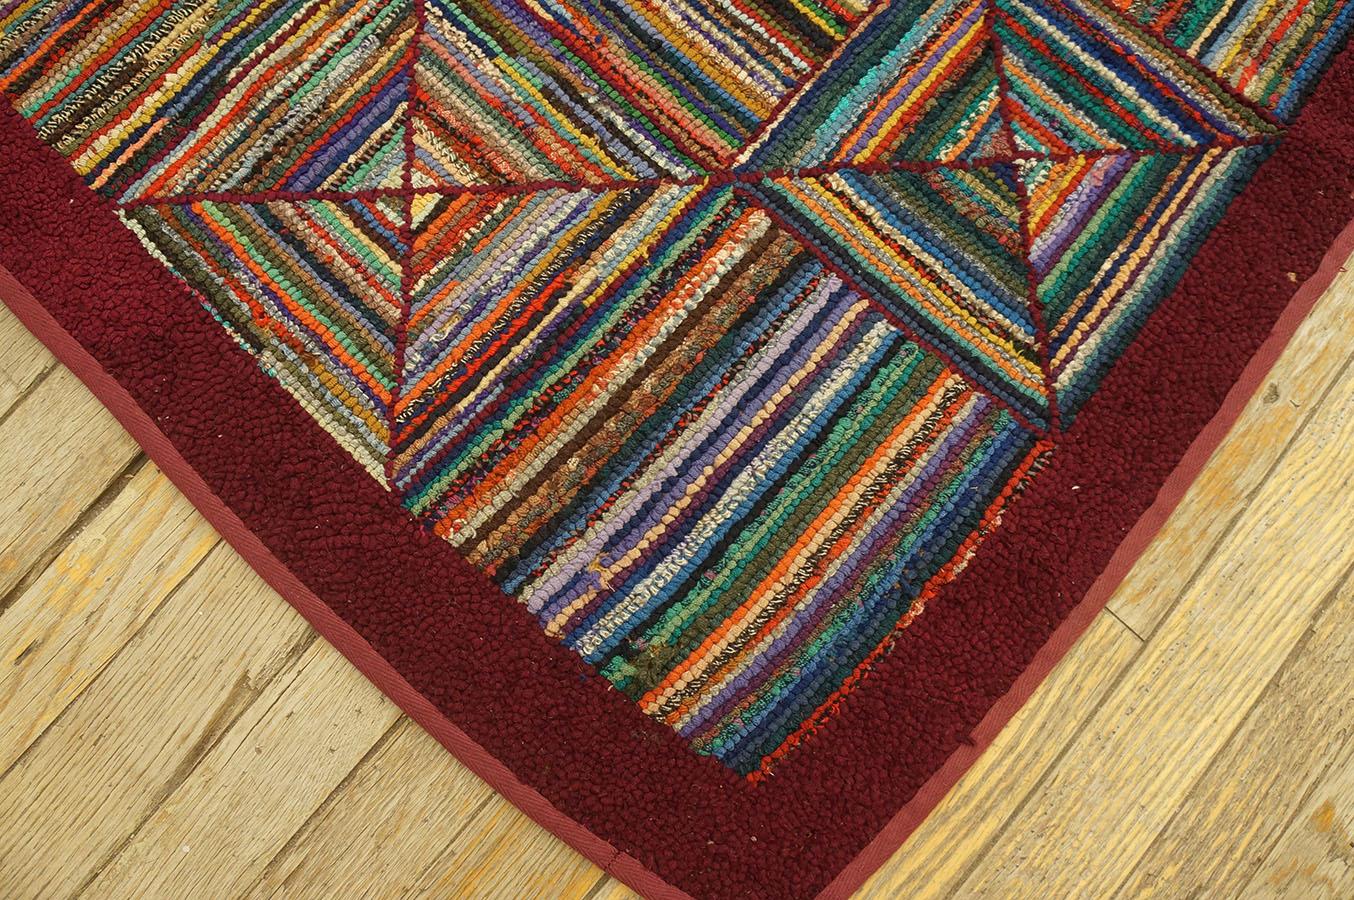 Mid 20th Century American Hooked Rug ( 7' 6'' x 9' 2''  - 228 x 279 cm ) For Sale 3